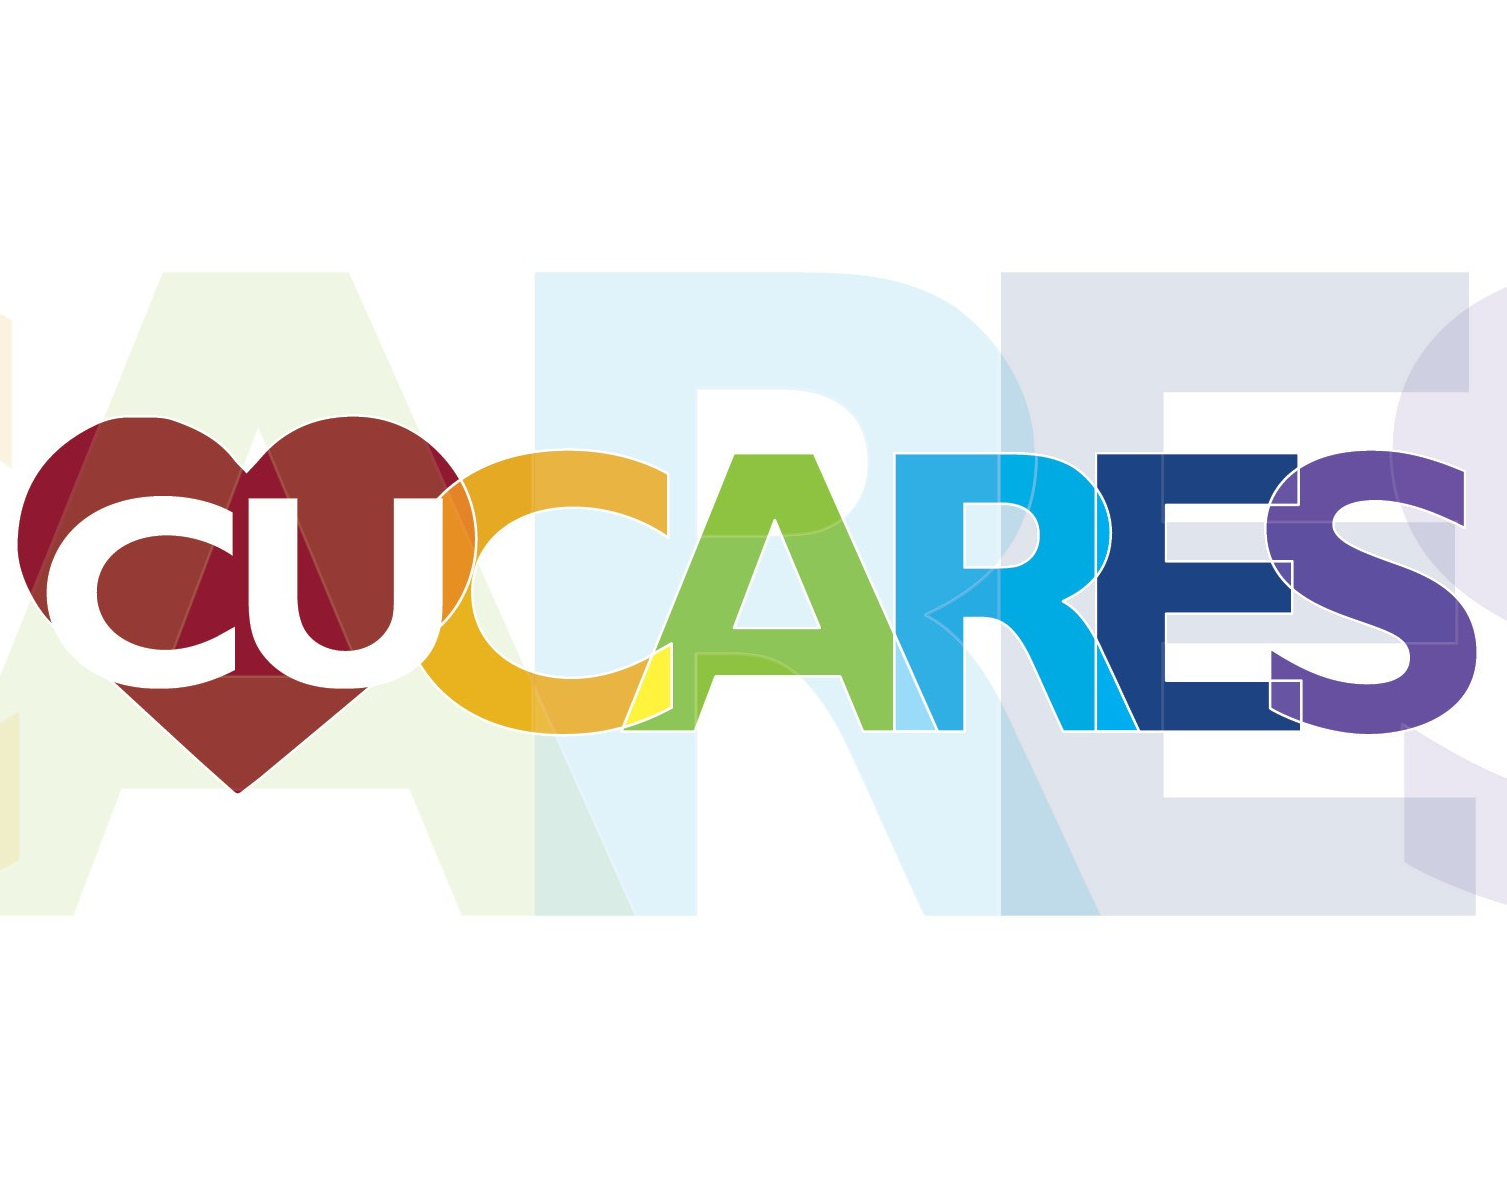 CU Cares wants you! New initiative calling on volunteers